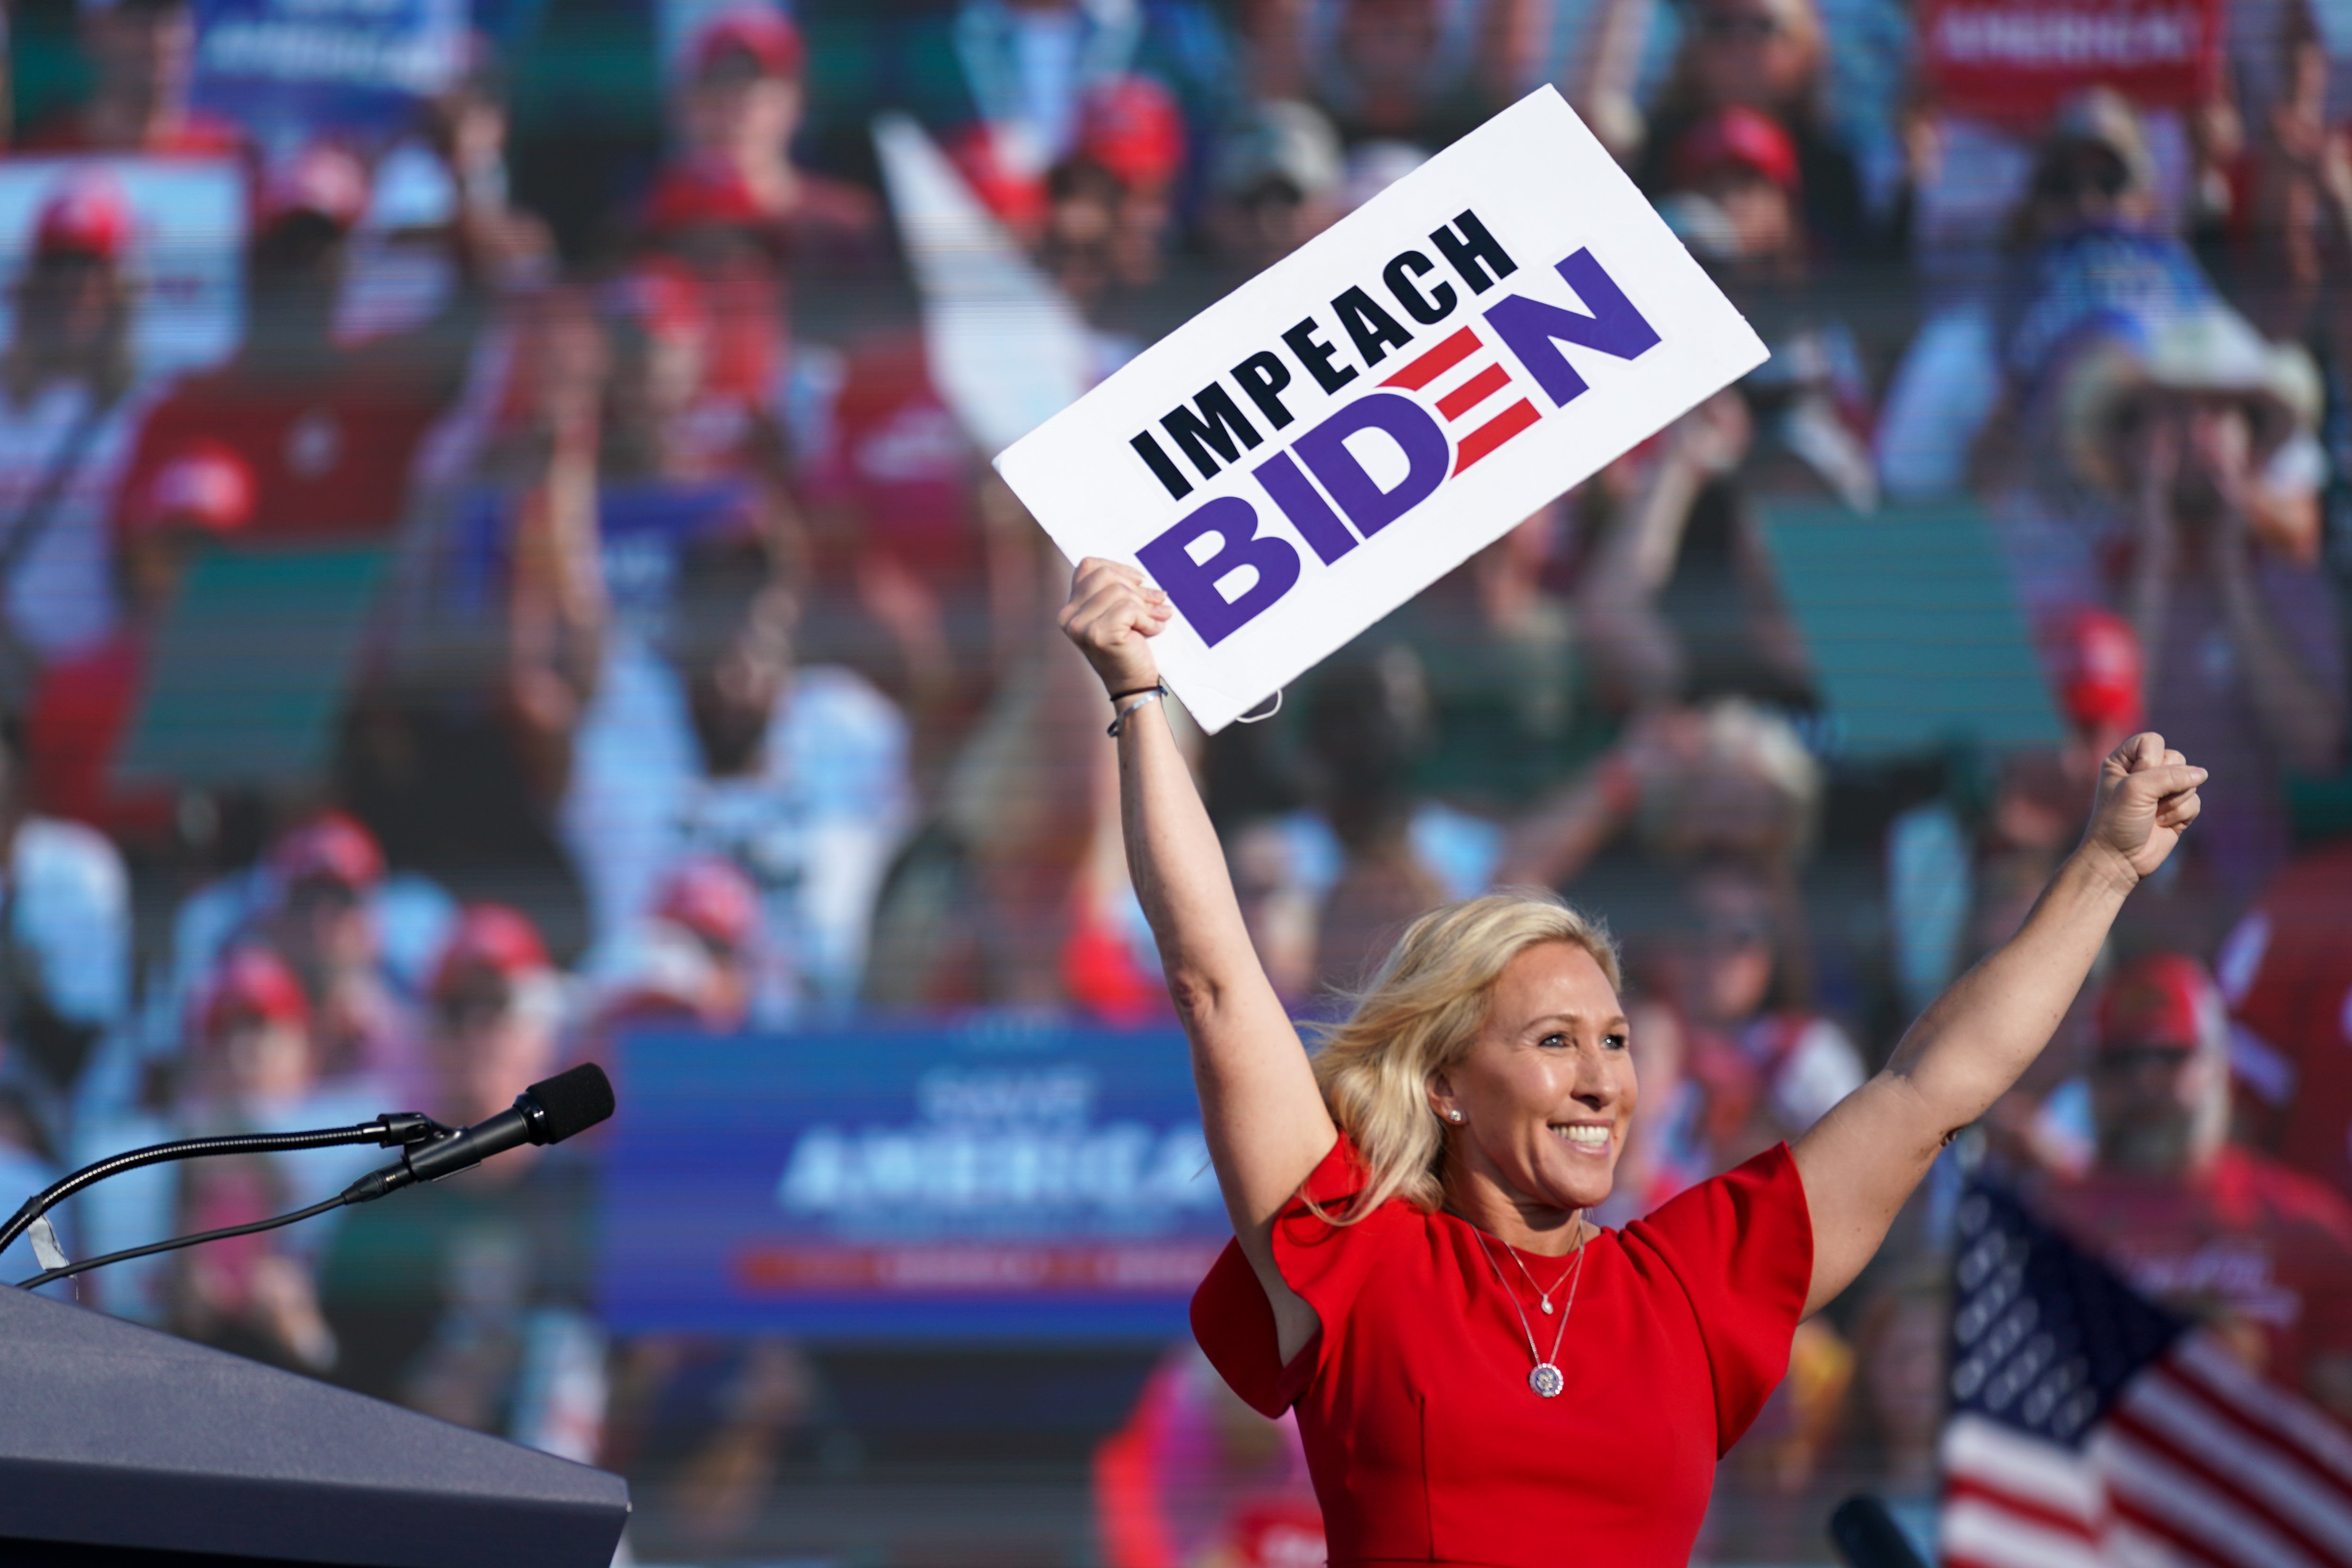 Rep Marjorie Taylor Greene holds a sign that reads Impeach Biden at a rally featuring former US President Donald Trump on 25 September 2021 in Perry, Georgia